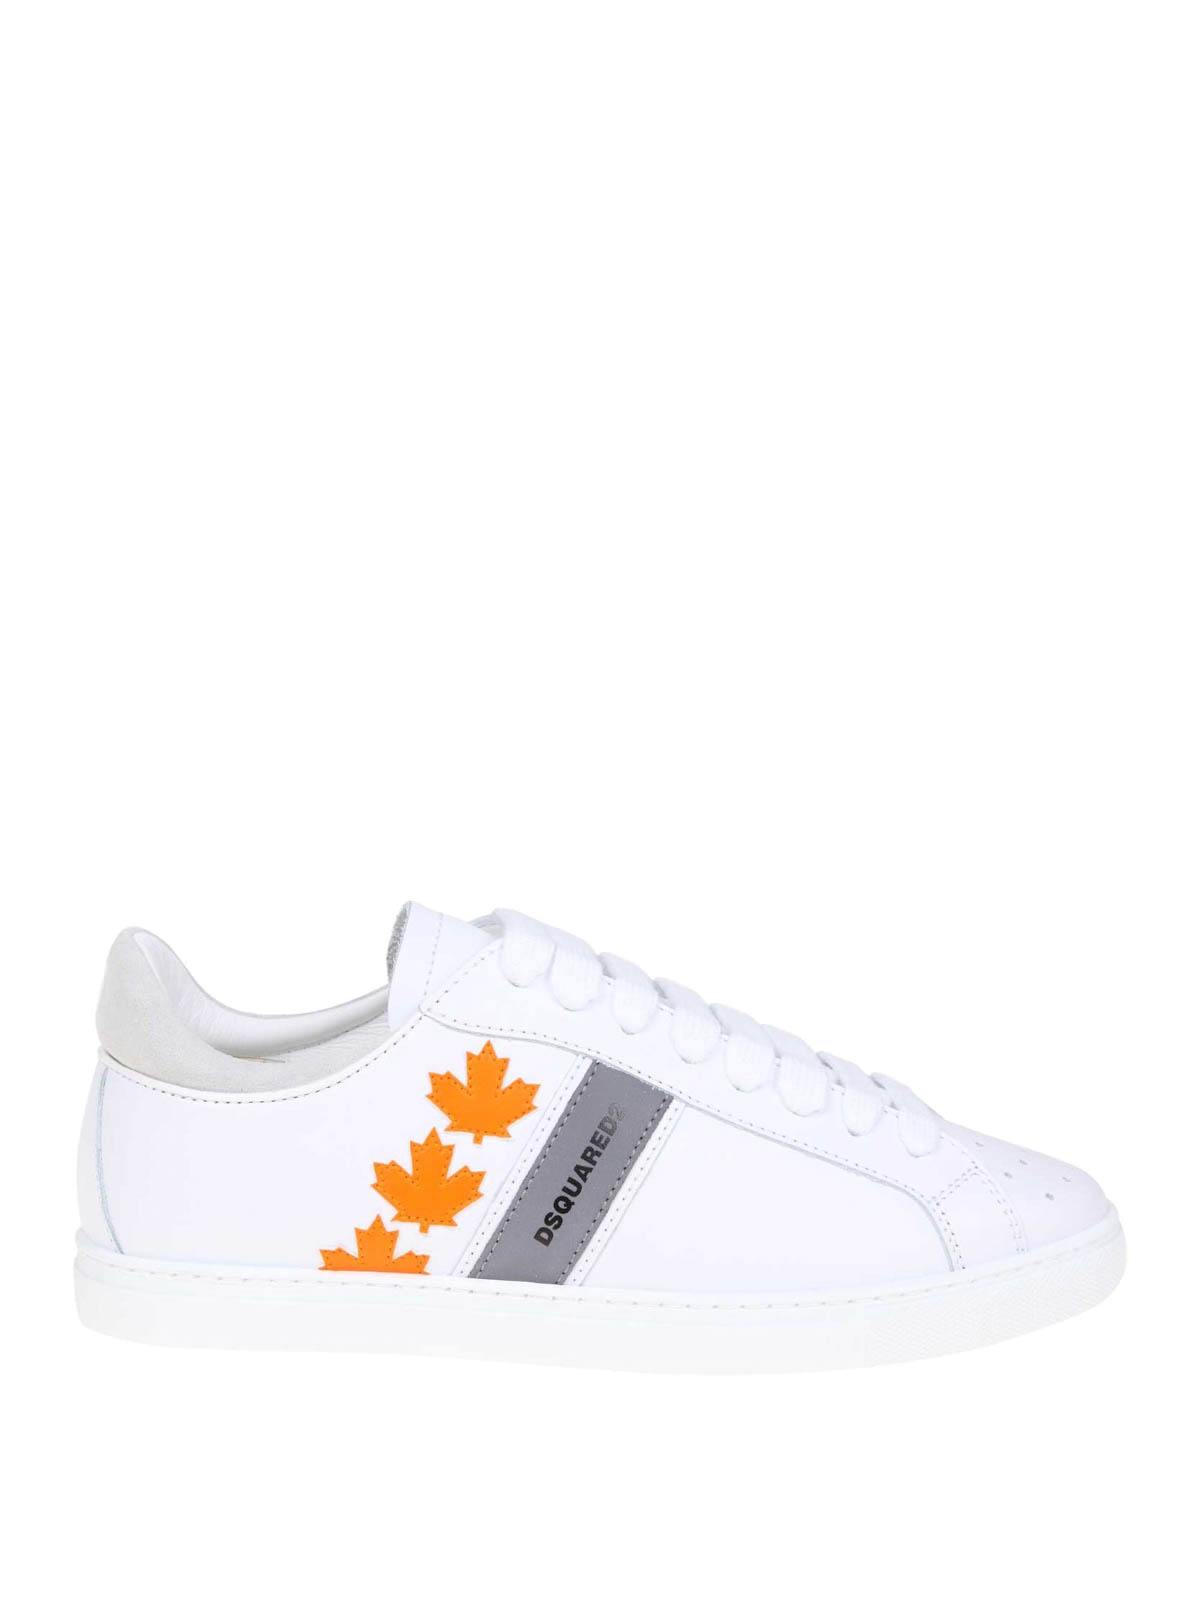 dsquared2 canadian team sneakers